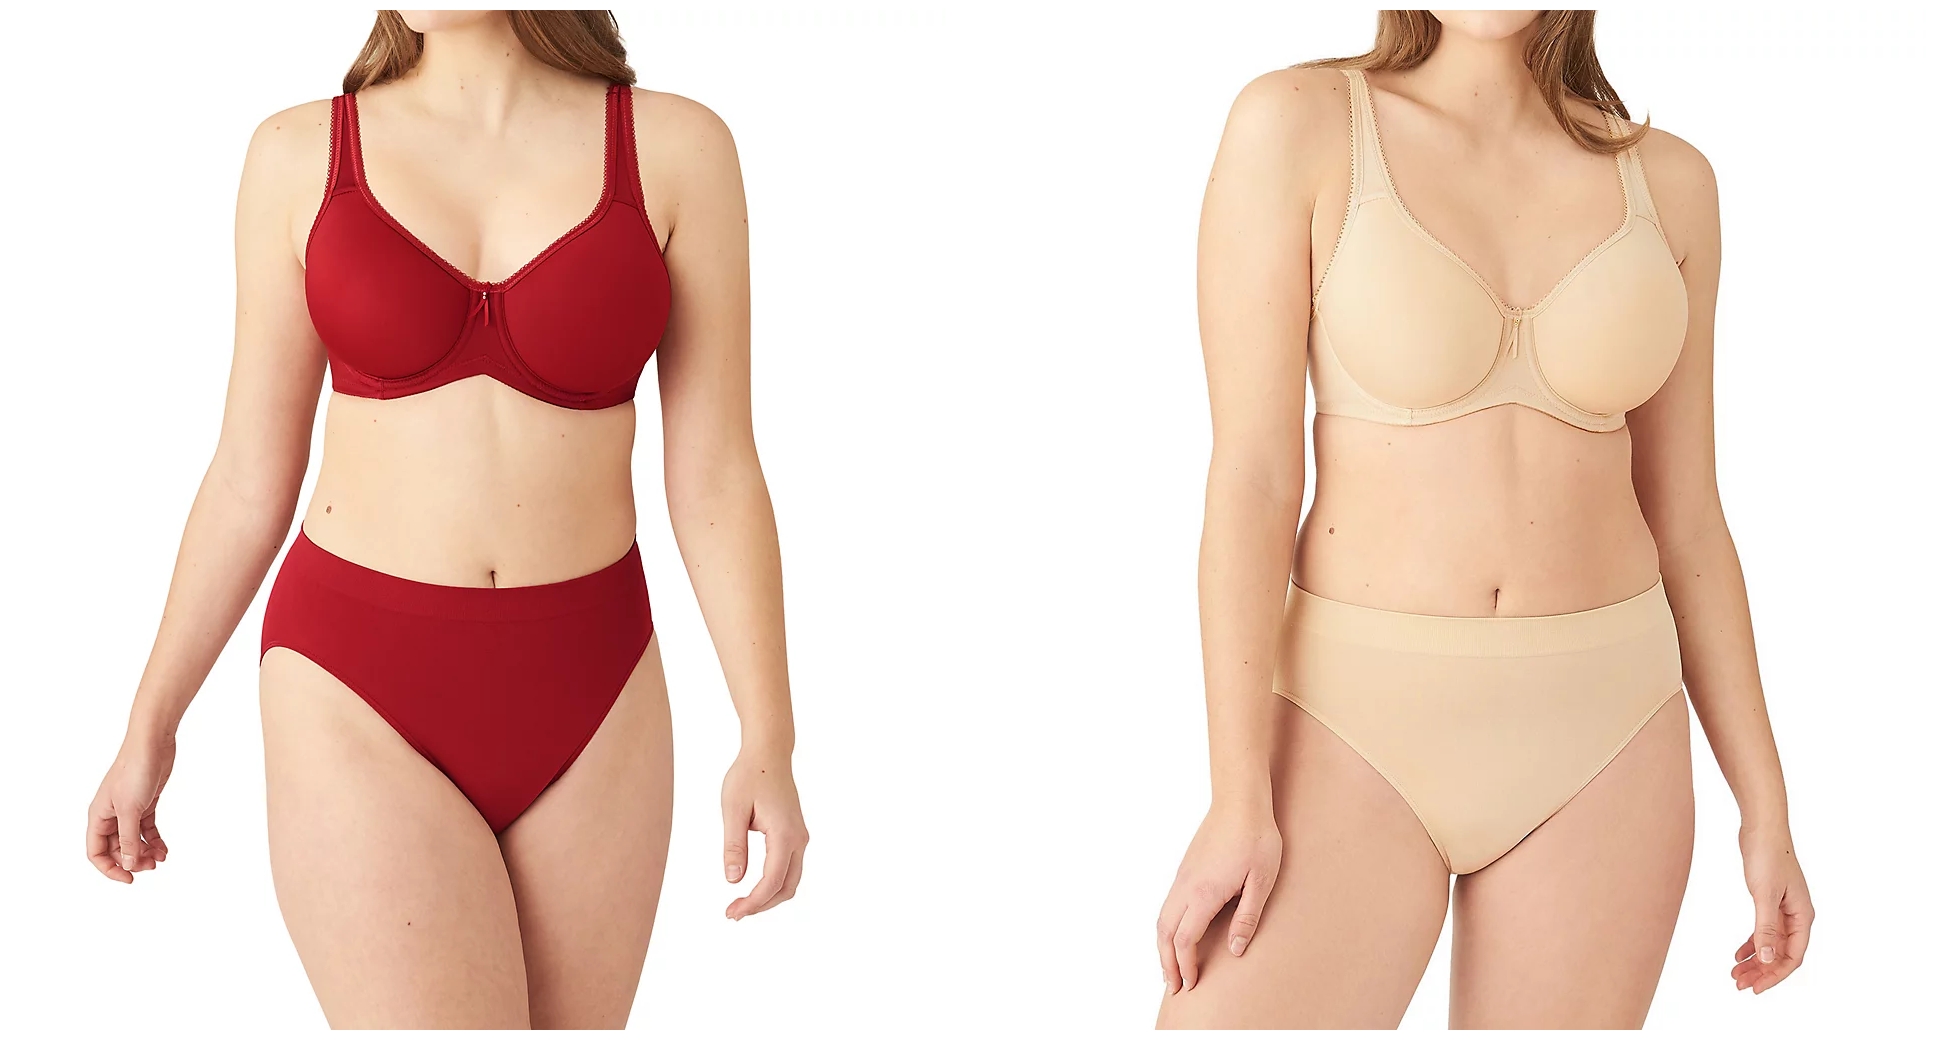 The secret to full figured bras that look and feel fantastic - great coverage and support!